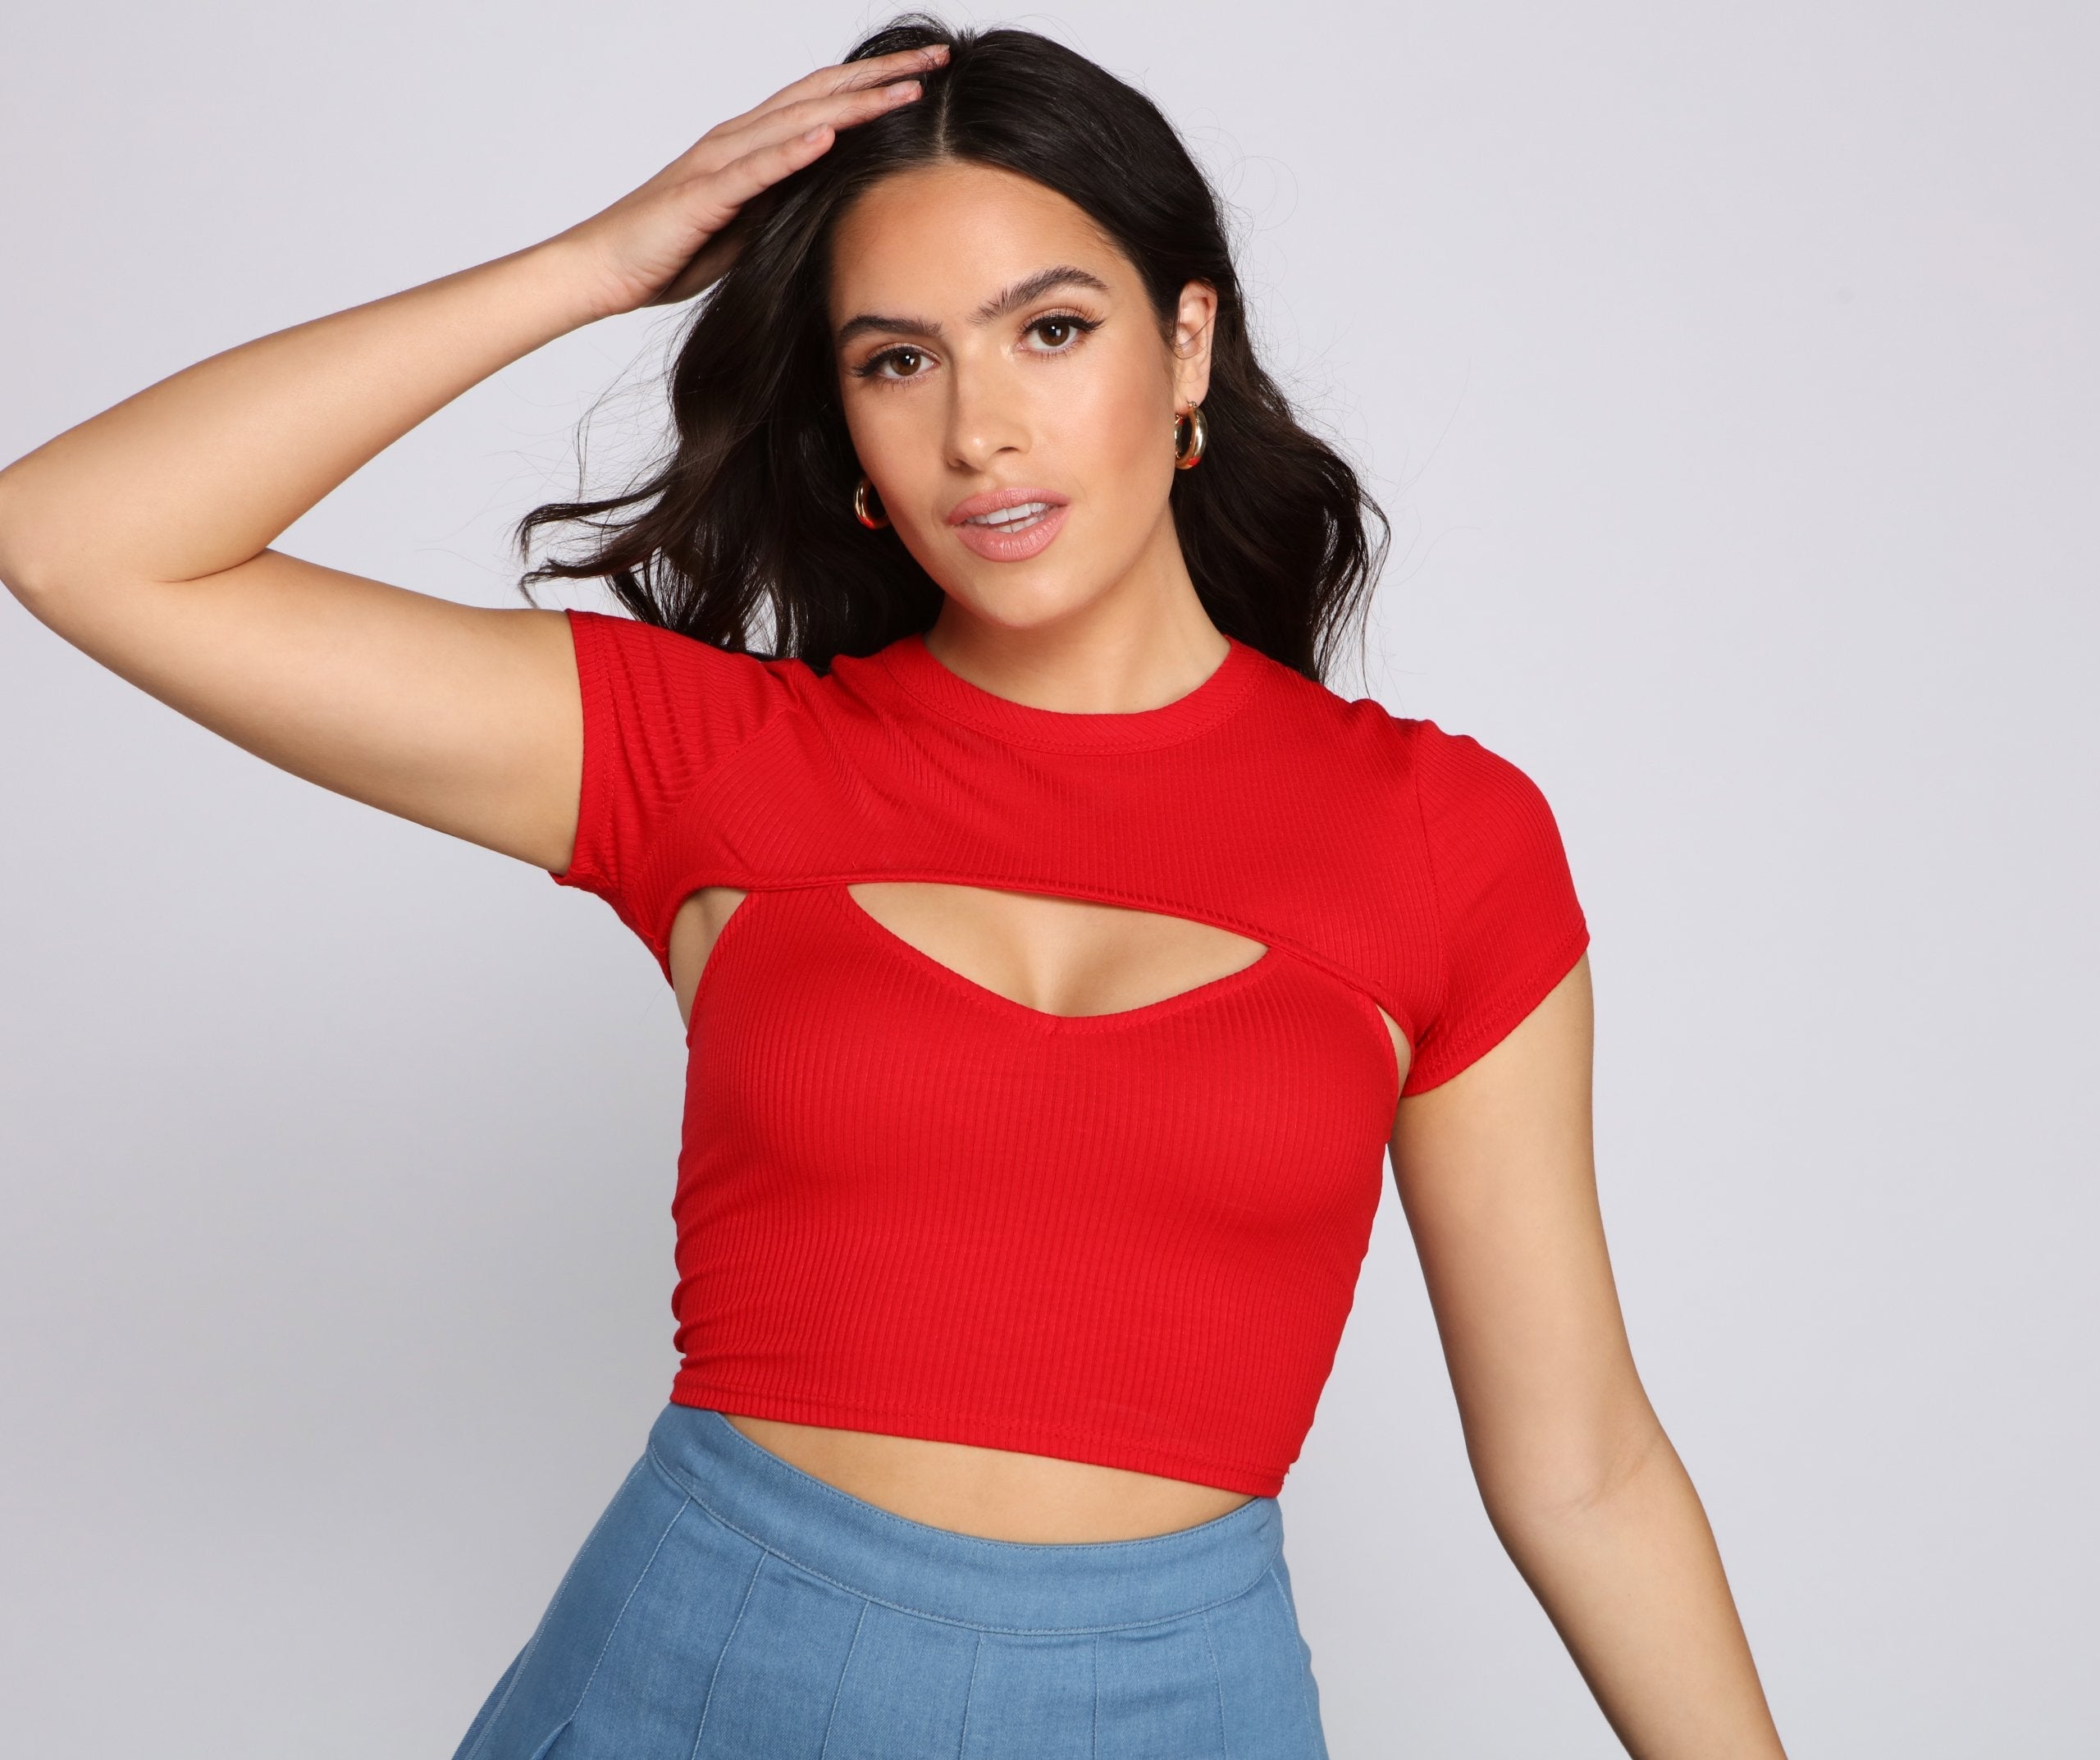 Chic Cuts Ribbed Knit Crop Top - Lady Occasions